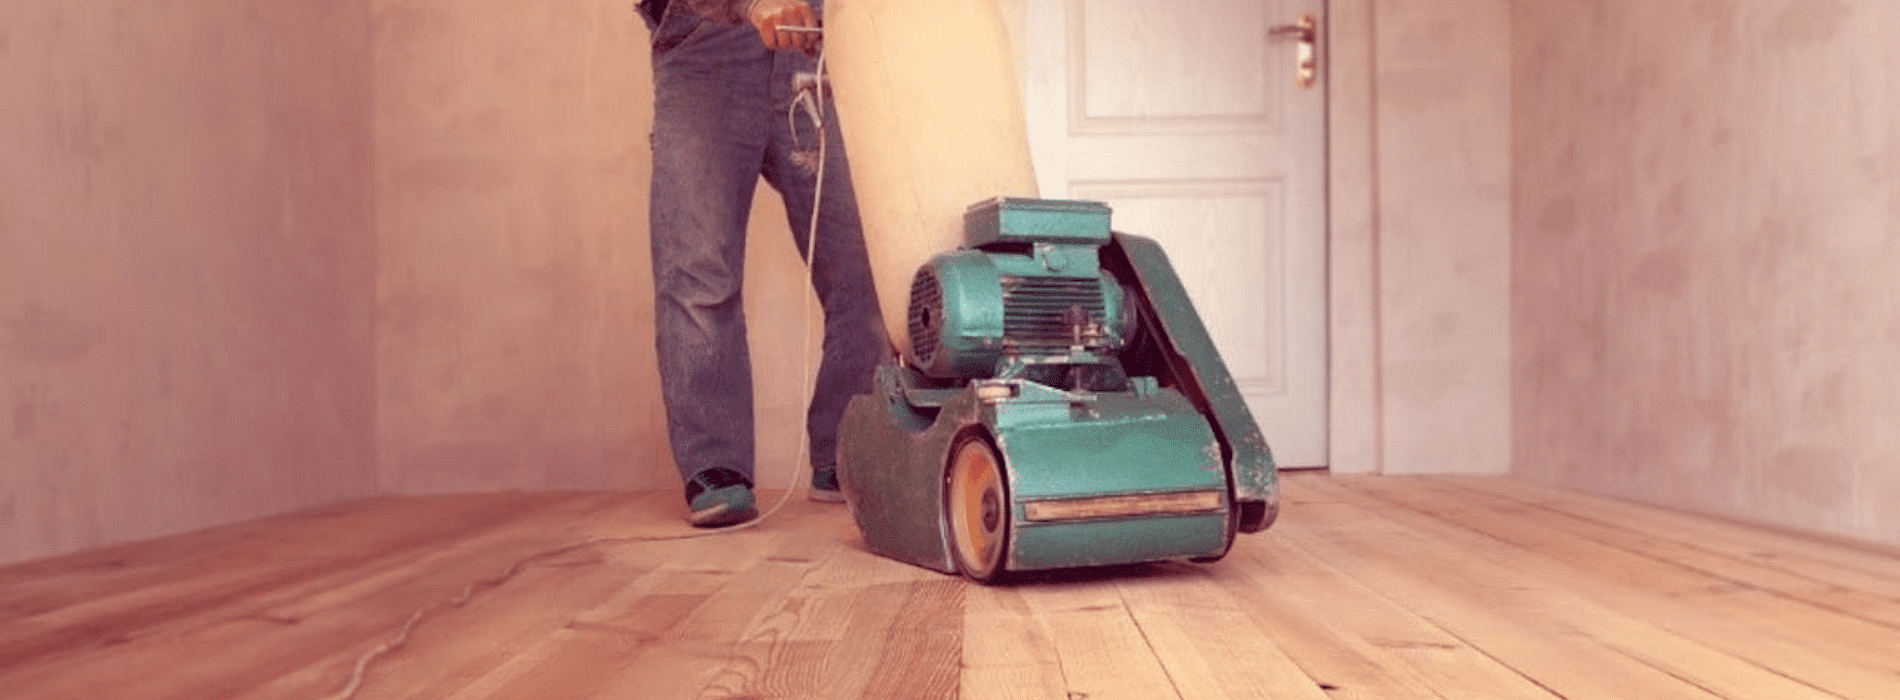 Mr Sander® working on a parquet floor in Brent, NW9 with a 2.2kW, 220V Bona belt sander. The team's dedication to delivering top-notch floor restoration outcomes is demonstrated by the HEPA-filtered dust extraction system, which guarantees a clean, effective sanding operation.